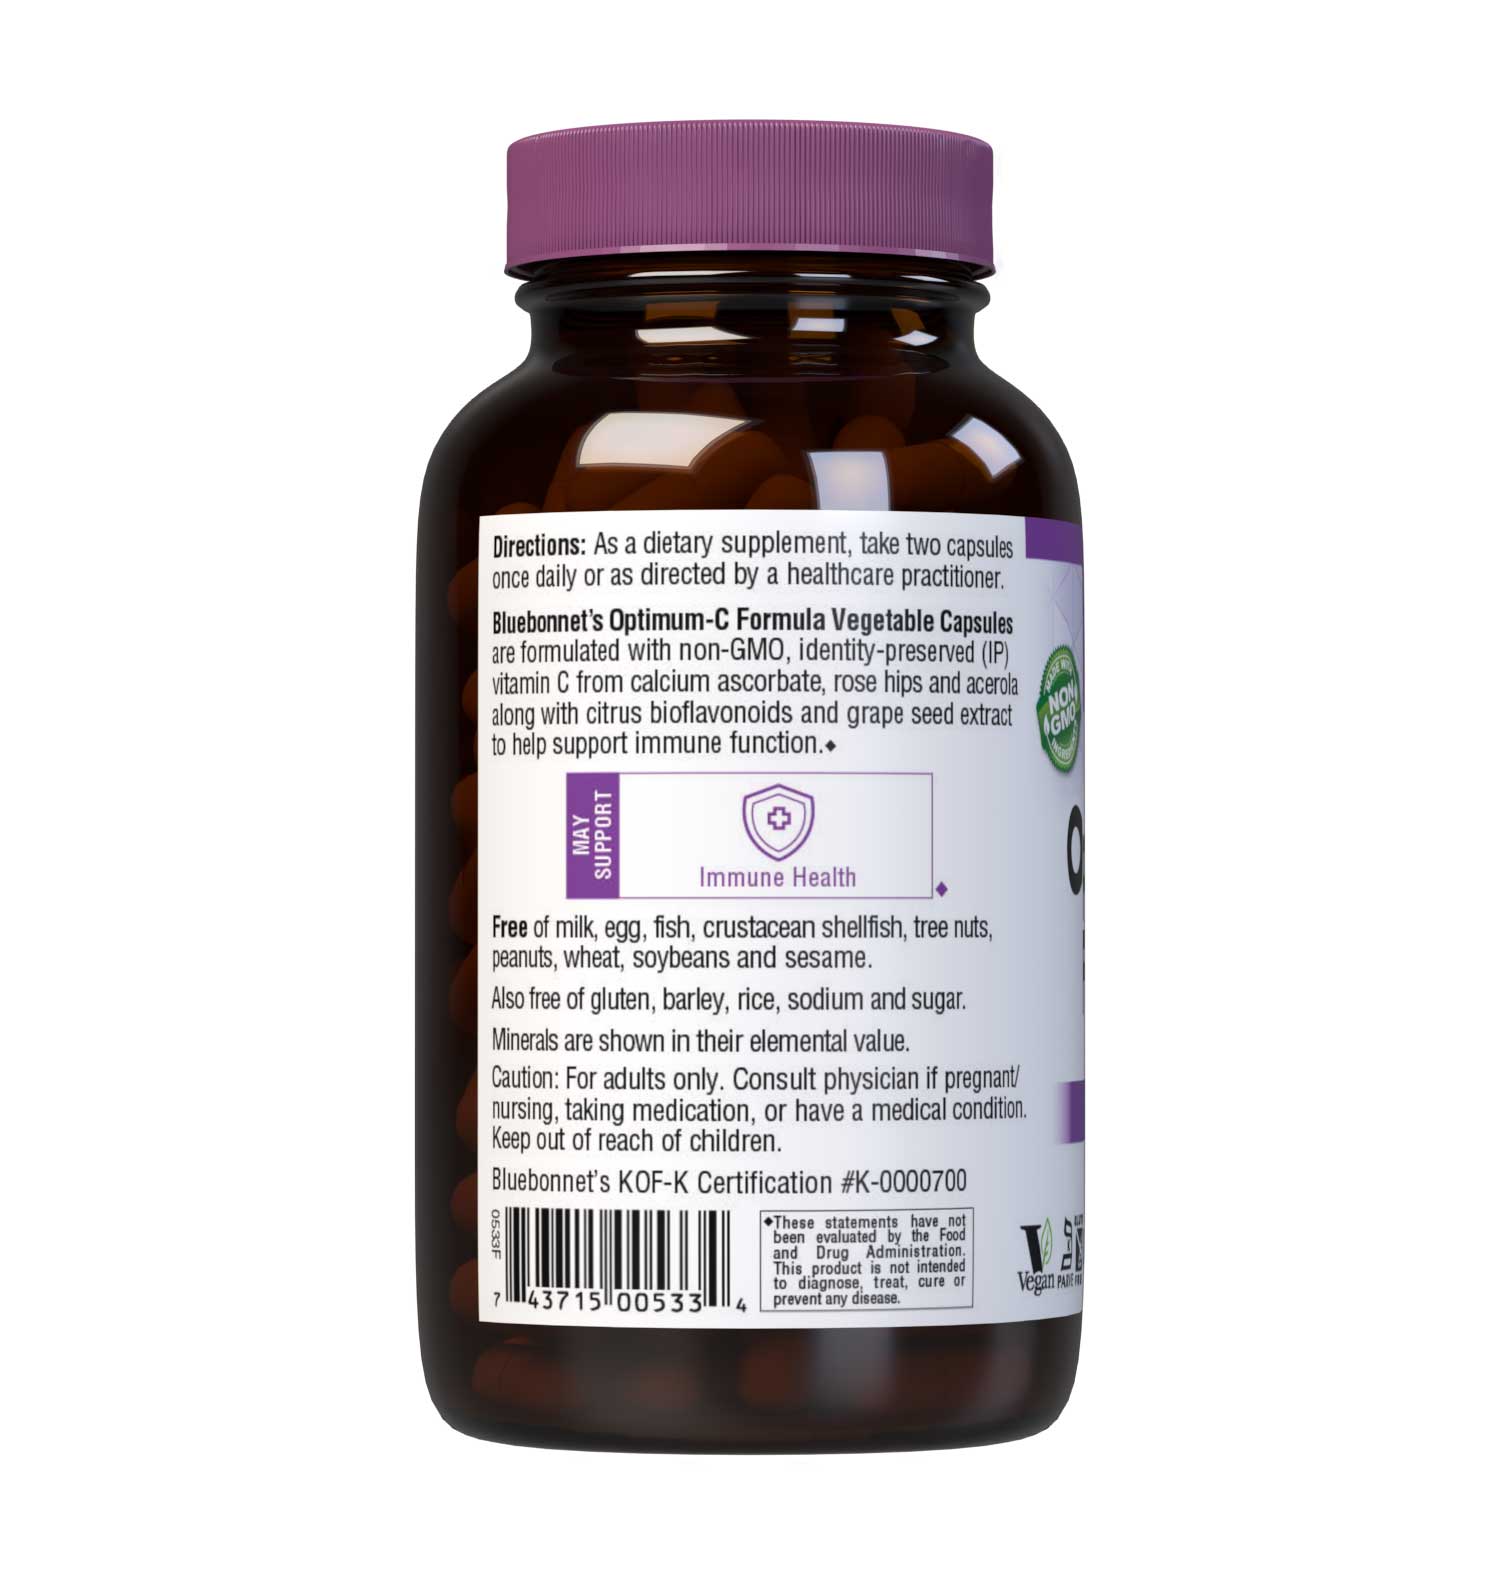 Bluebonnet’s Optimum-C Formula 180 Vegetable Capsules are formulated with non-GMO, identity preserved (IP) vitamin C from calcium ascorbate, rose hips and acerola along with citrus bioflavonoids and grape seed extract to help support immune function. Description panel. #size_180 count